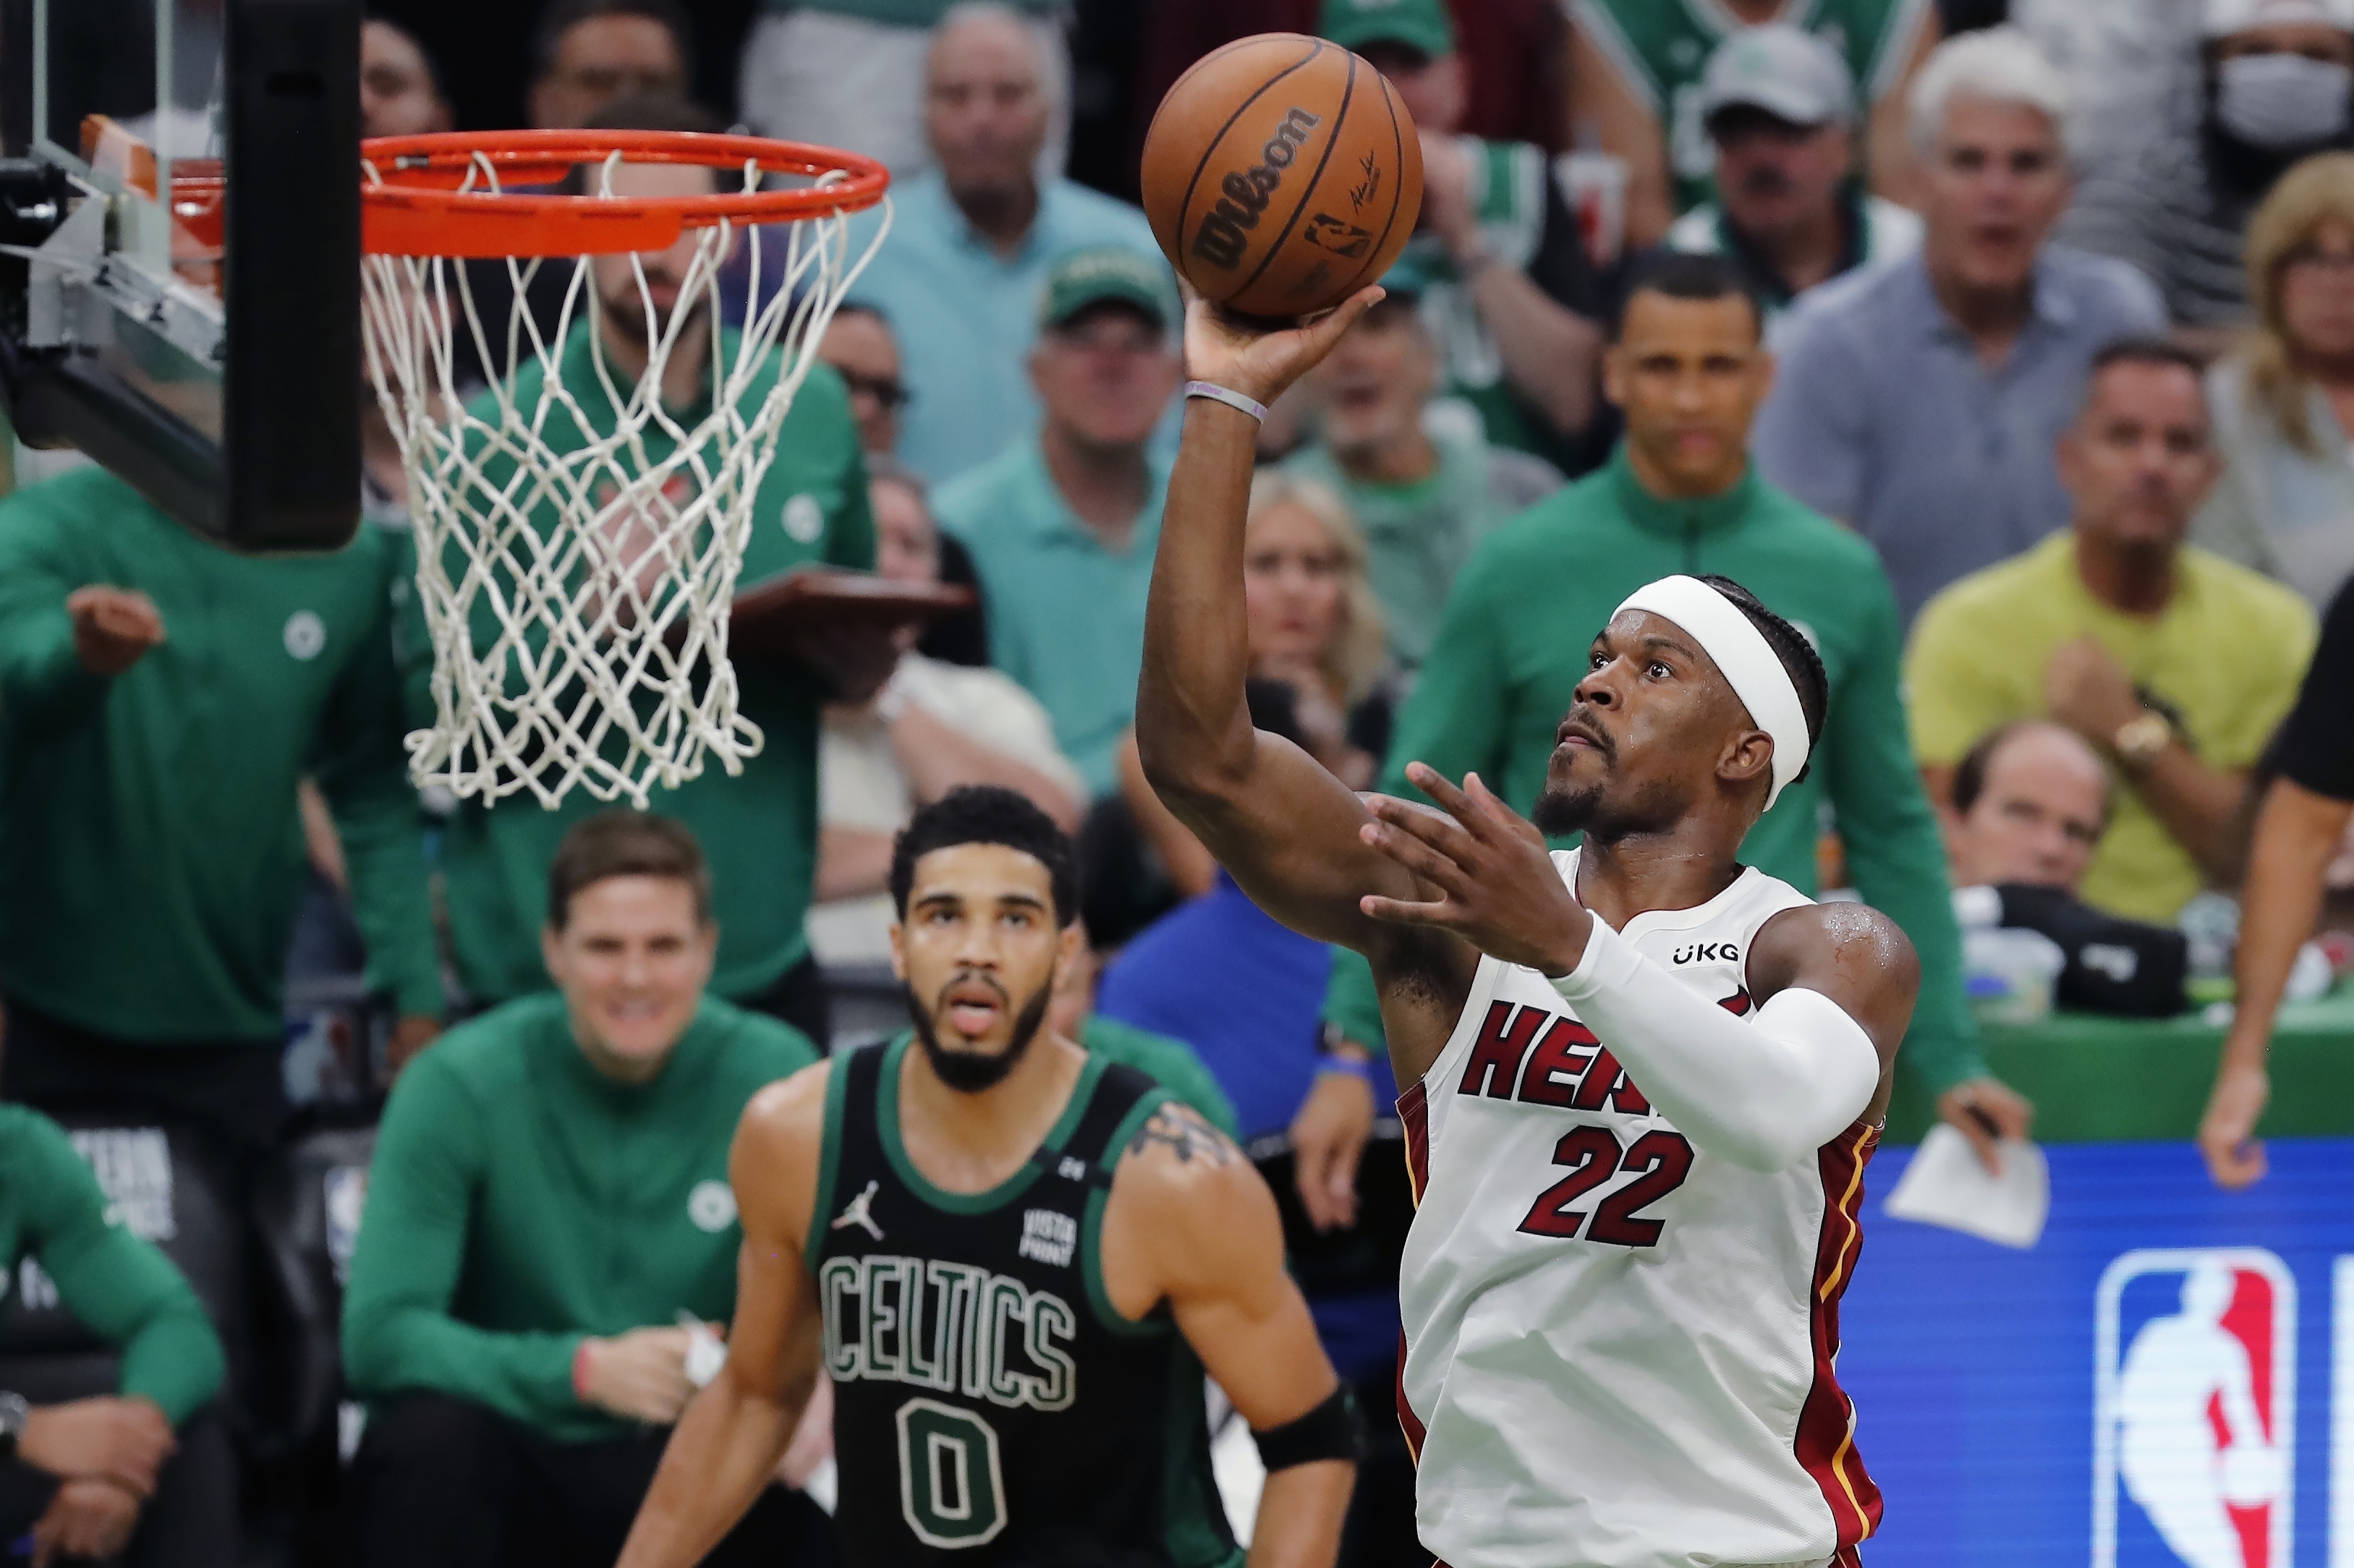 Heat-Celtics Game 7 live stream (5/29) How to watch Game 7 online, TV, time